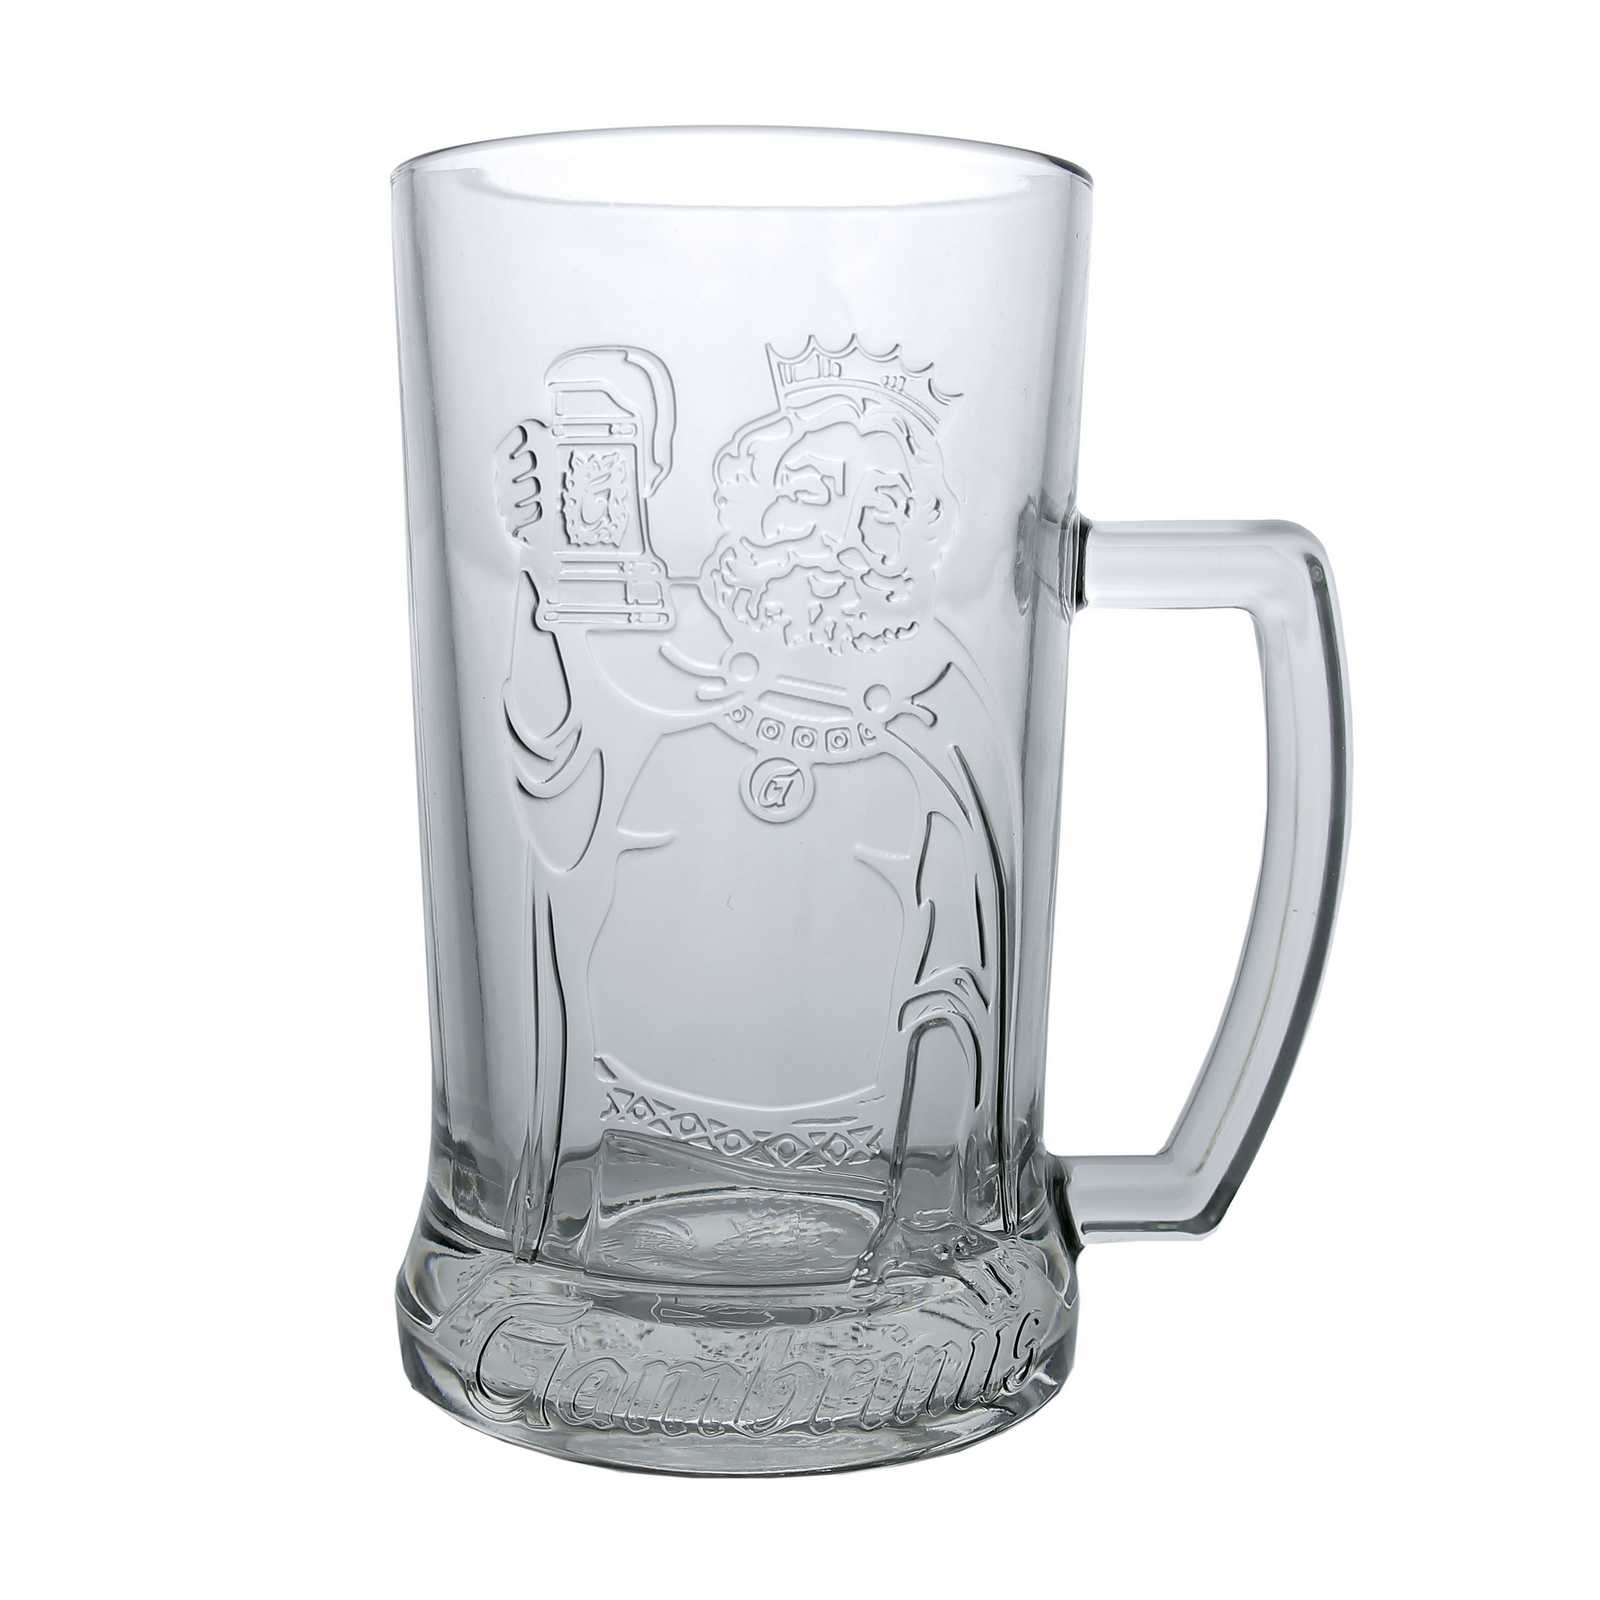 Gambrinus 0.5L glass with handle 5 + 1 for free